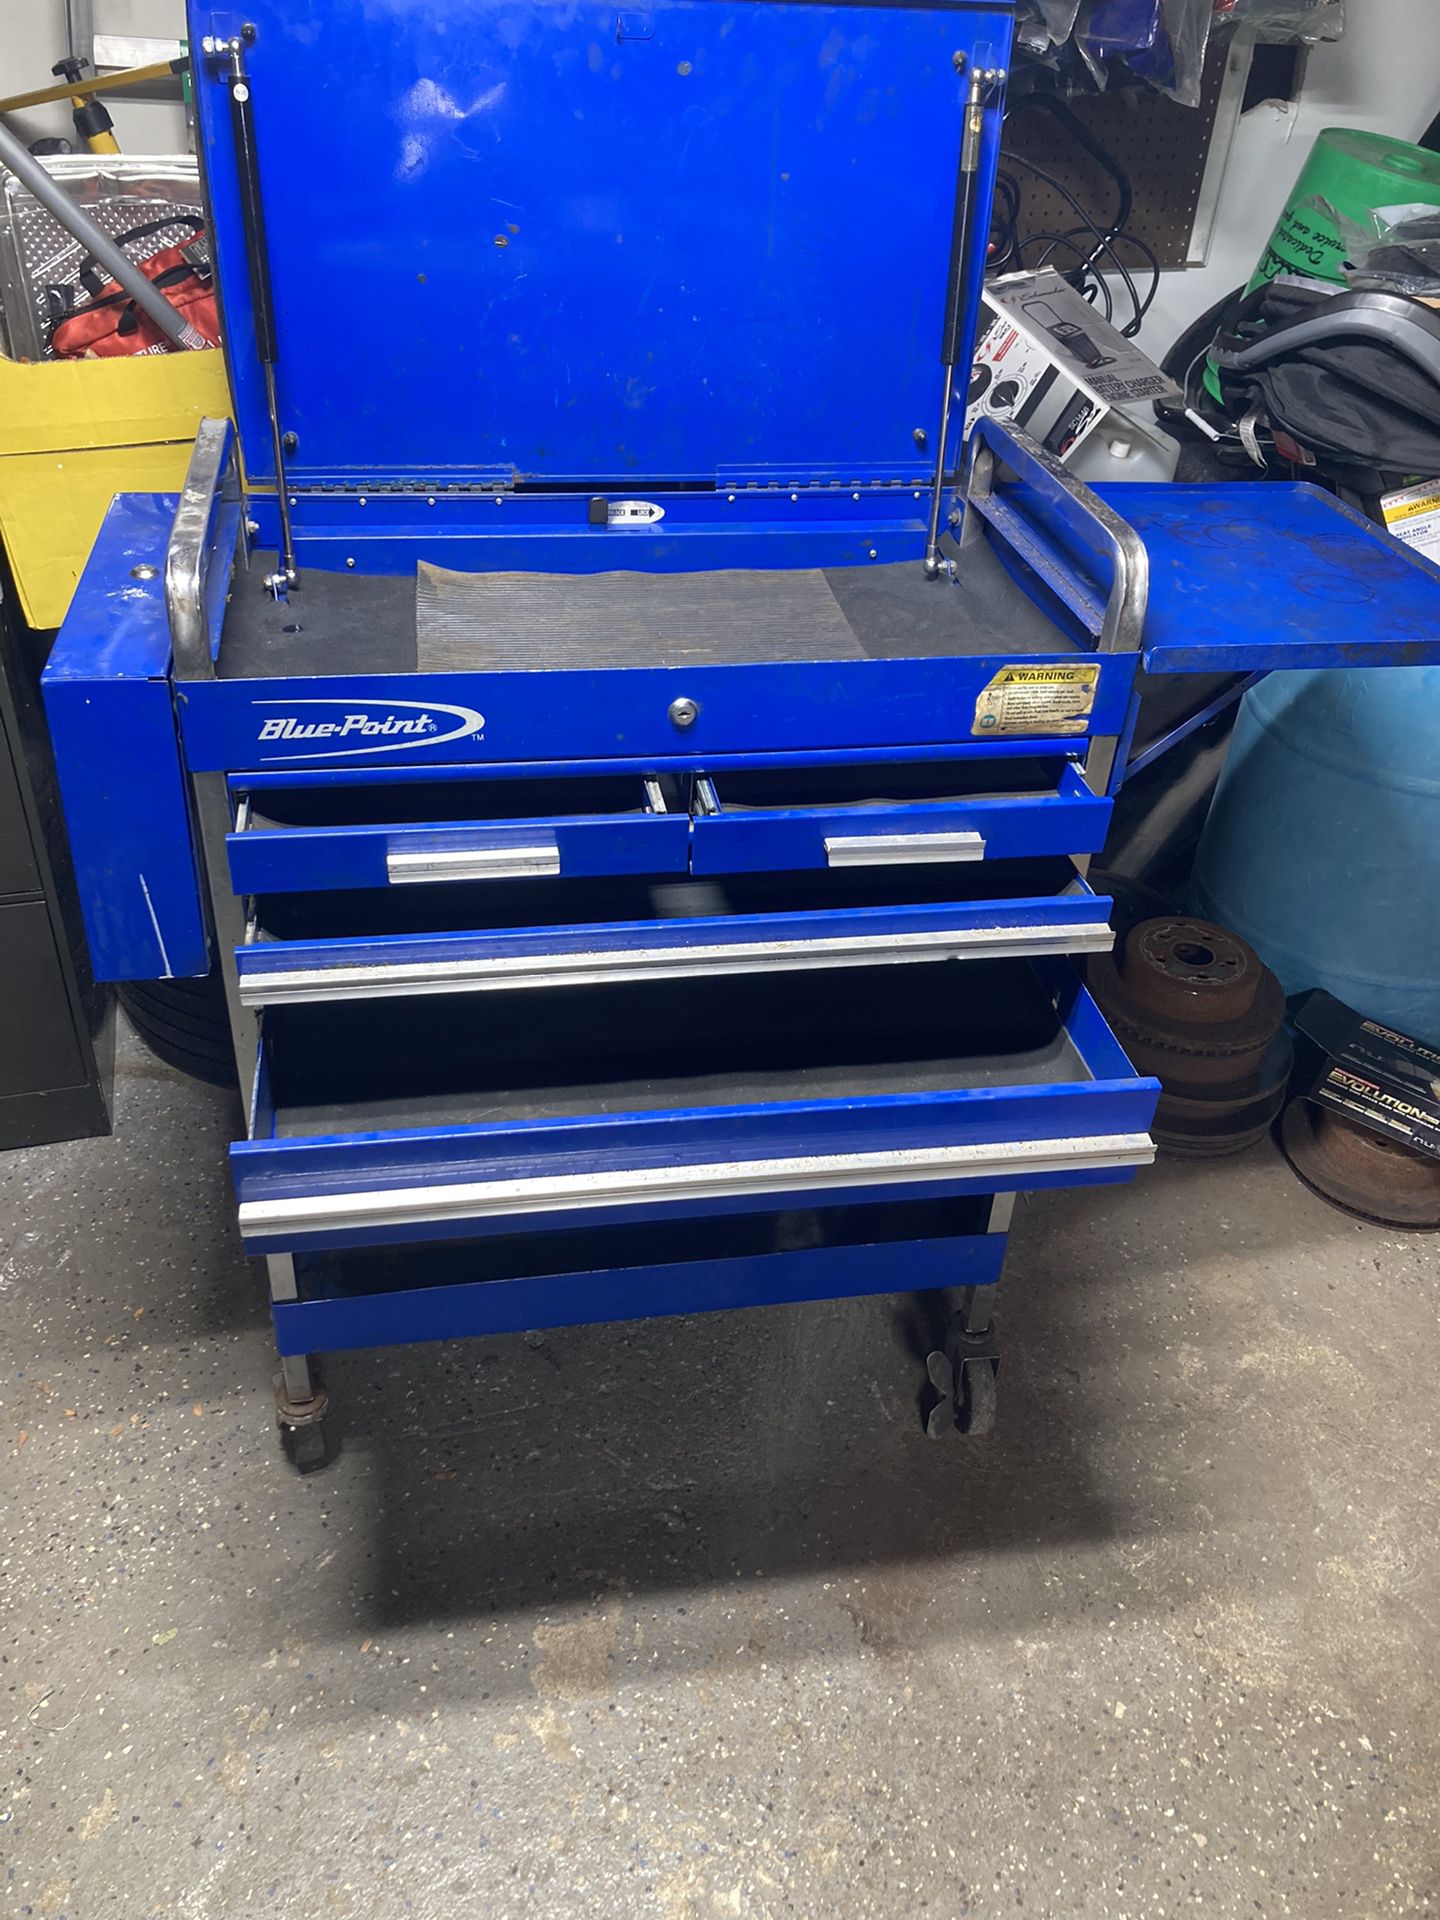  Four-drawer Bluepoint Tool Cart